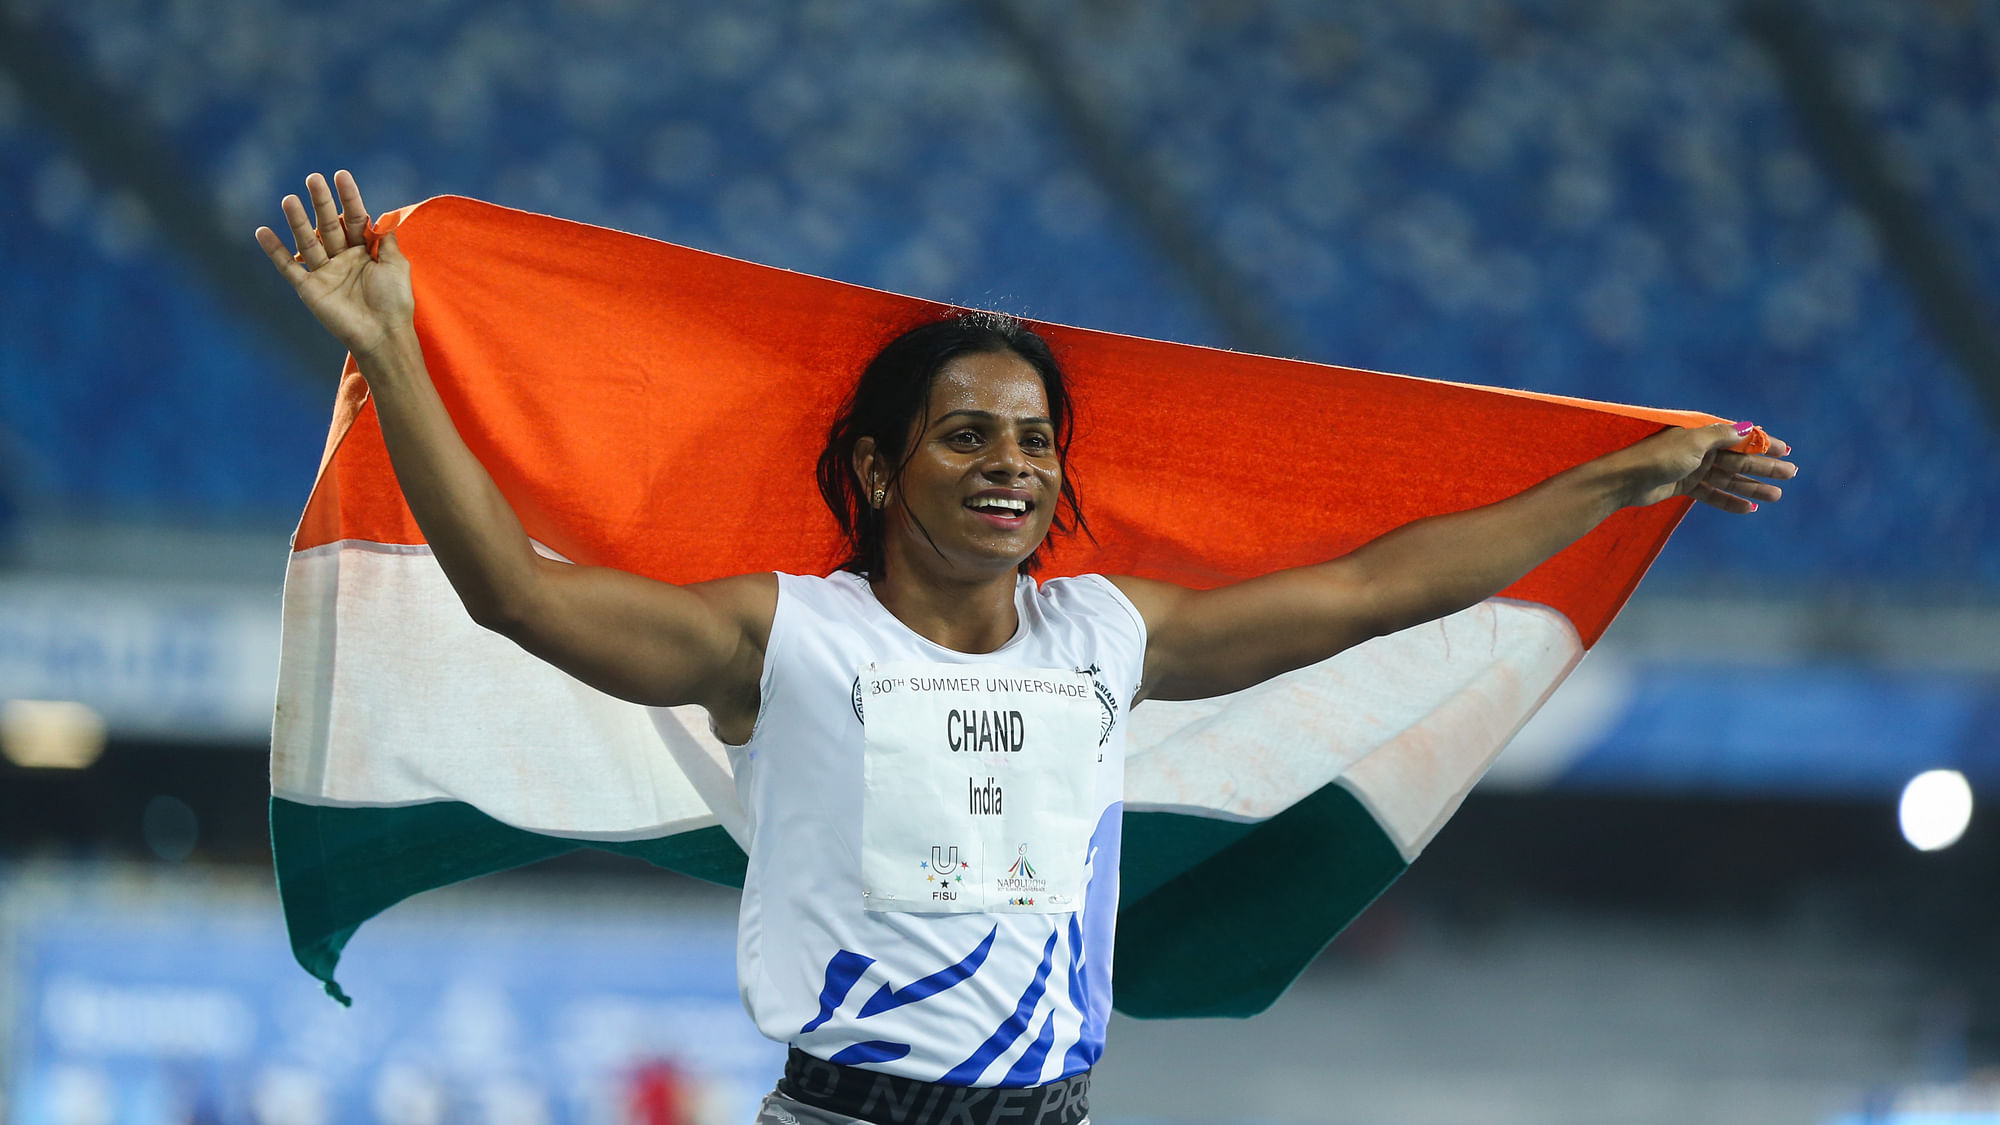 Dutee Chand  broke her own 100m national record on her way to a Gold at the National Open Athletics Championships in Ranchi.